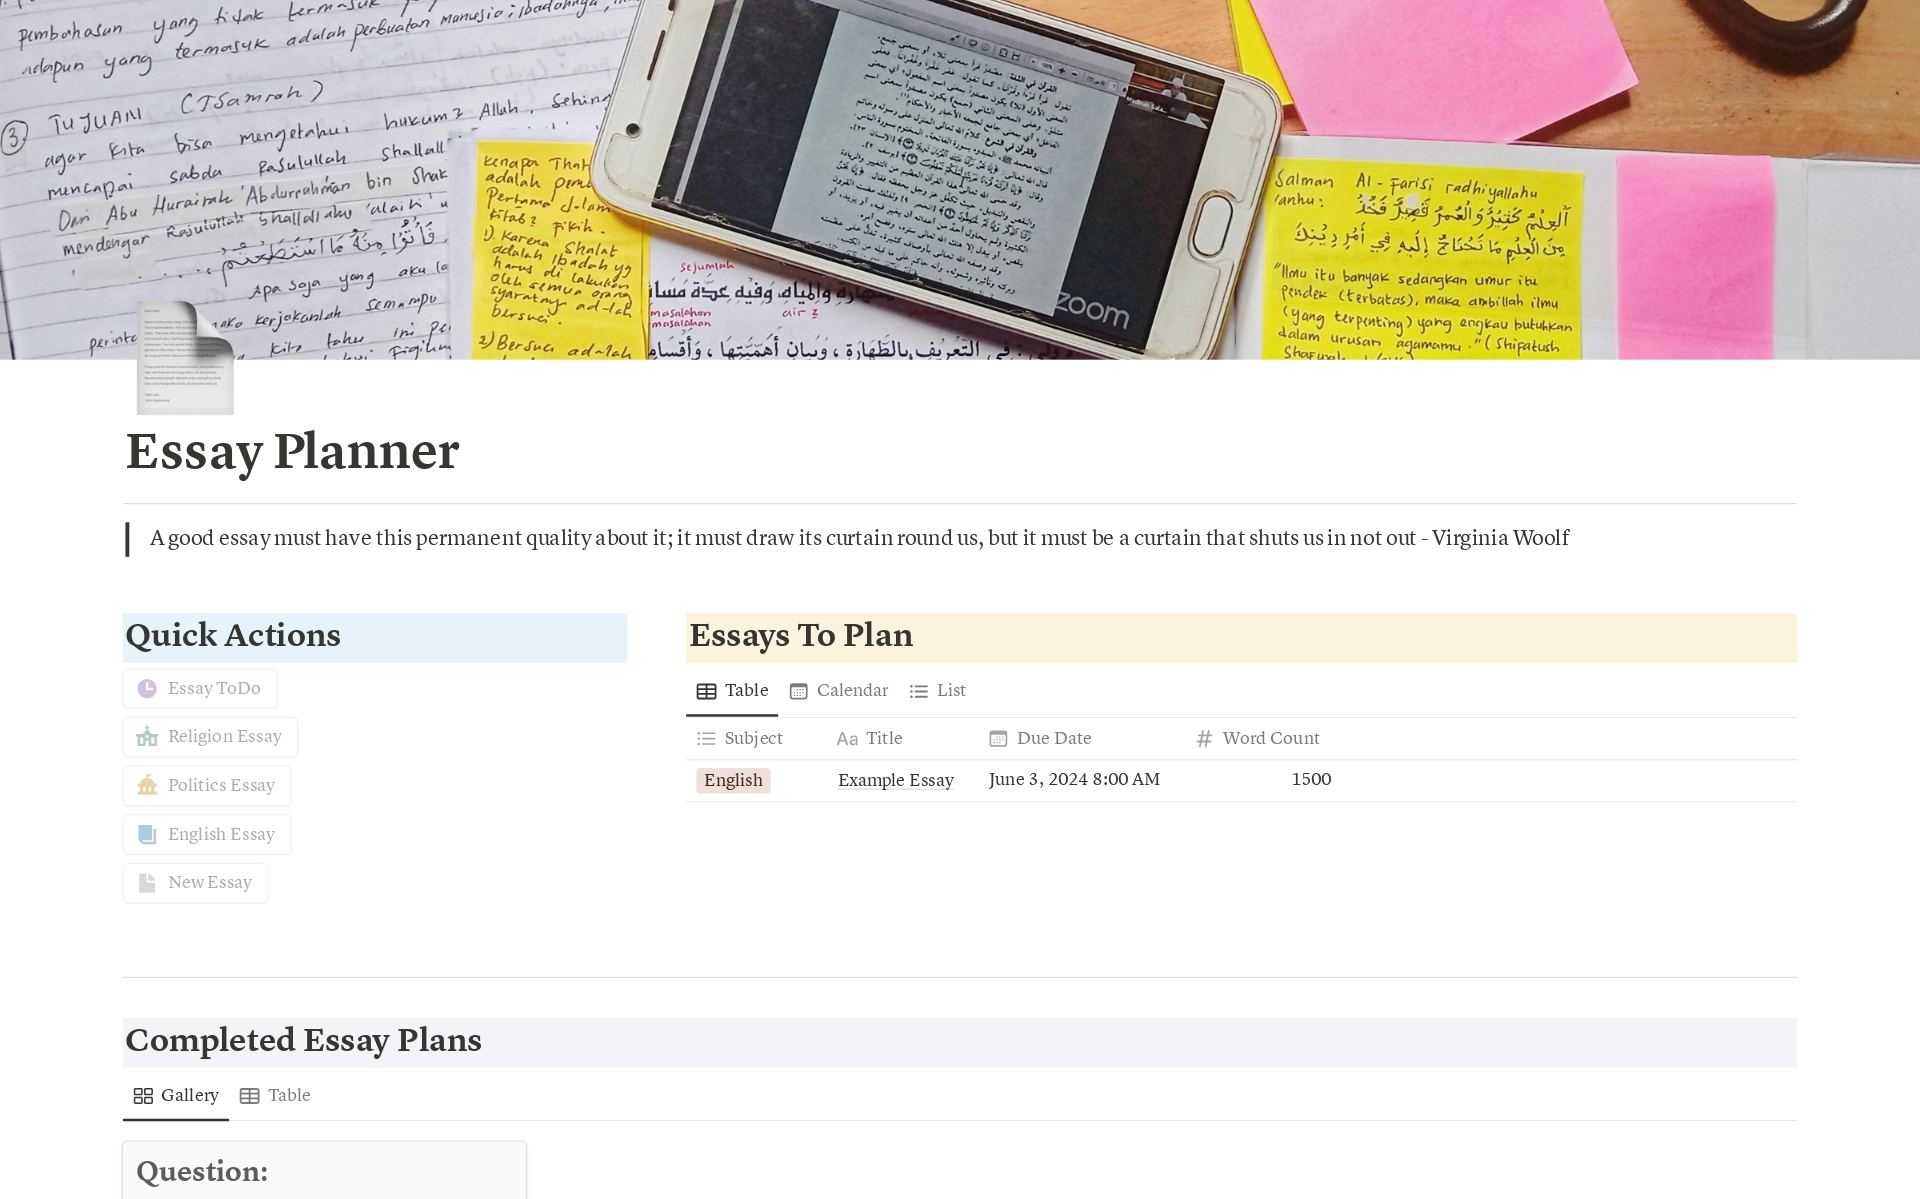 My essay planner that I used for my A Level essays. Useful side buttons allow you to quickly plan essays depending on the subject, feel free to edit the buttons/essay templates to suit your specific subjects. Essay tracker to allows you to see what essays you still need to plan.